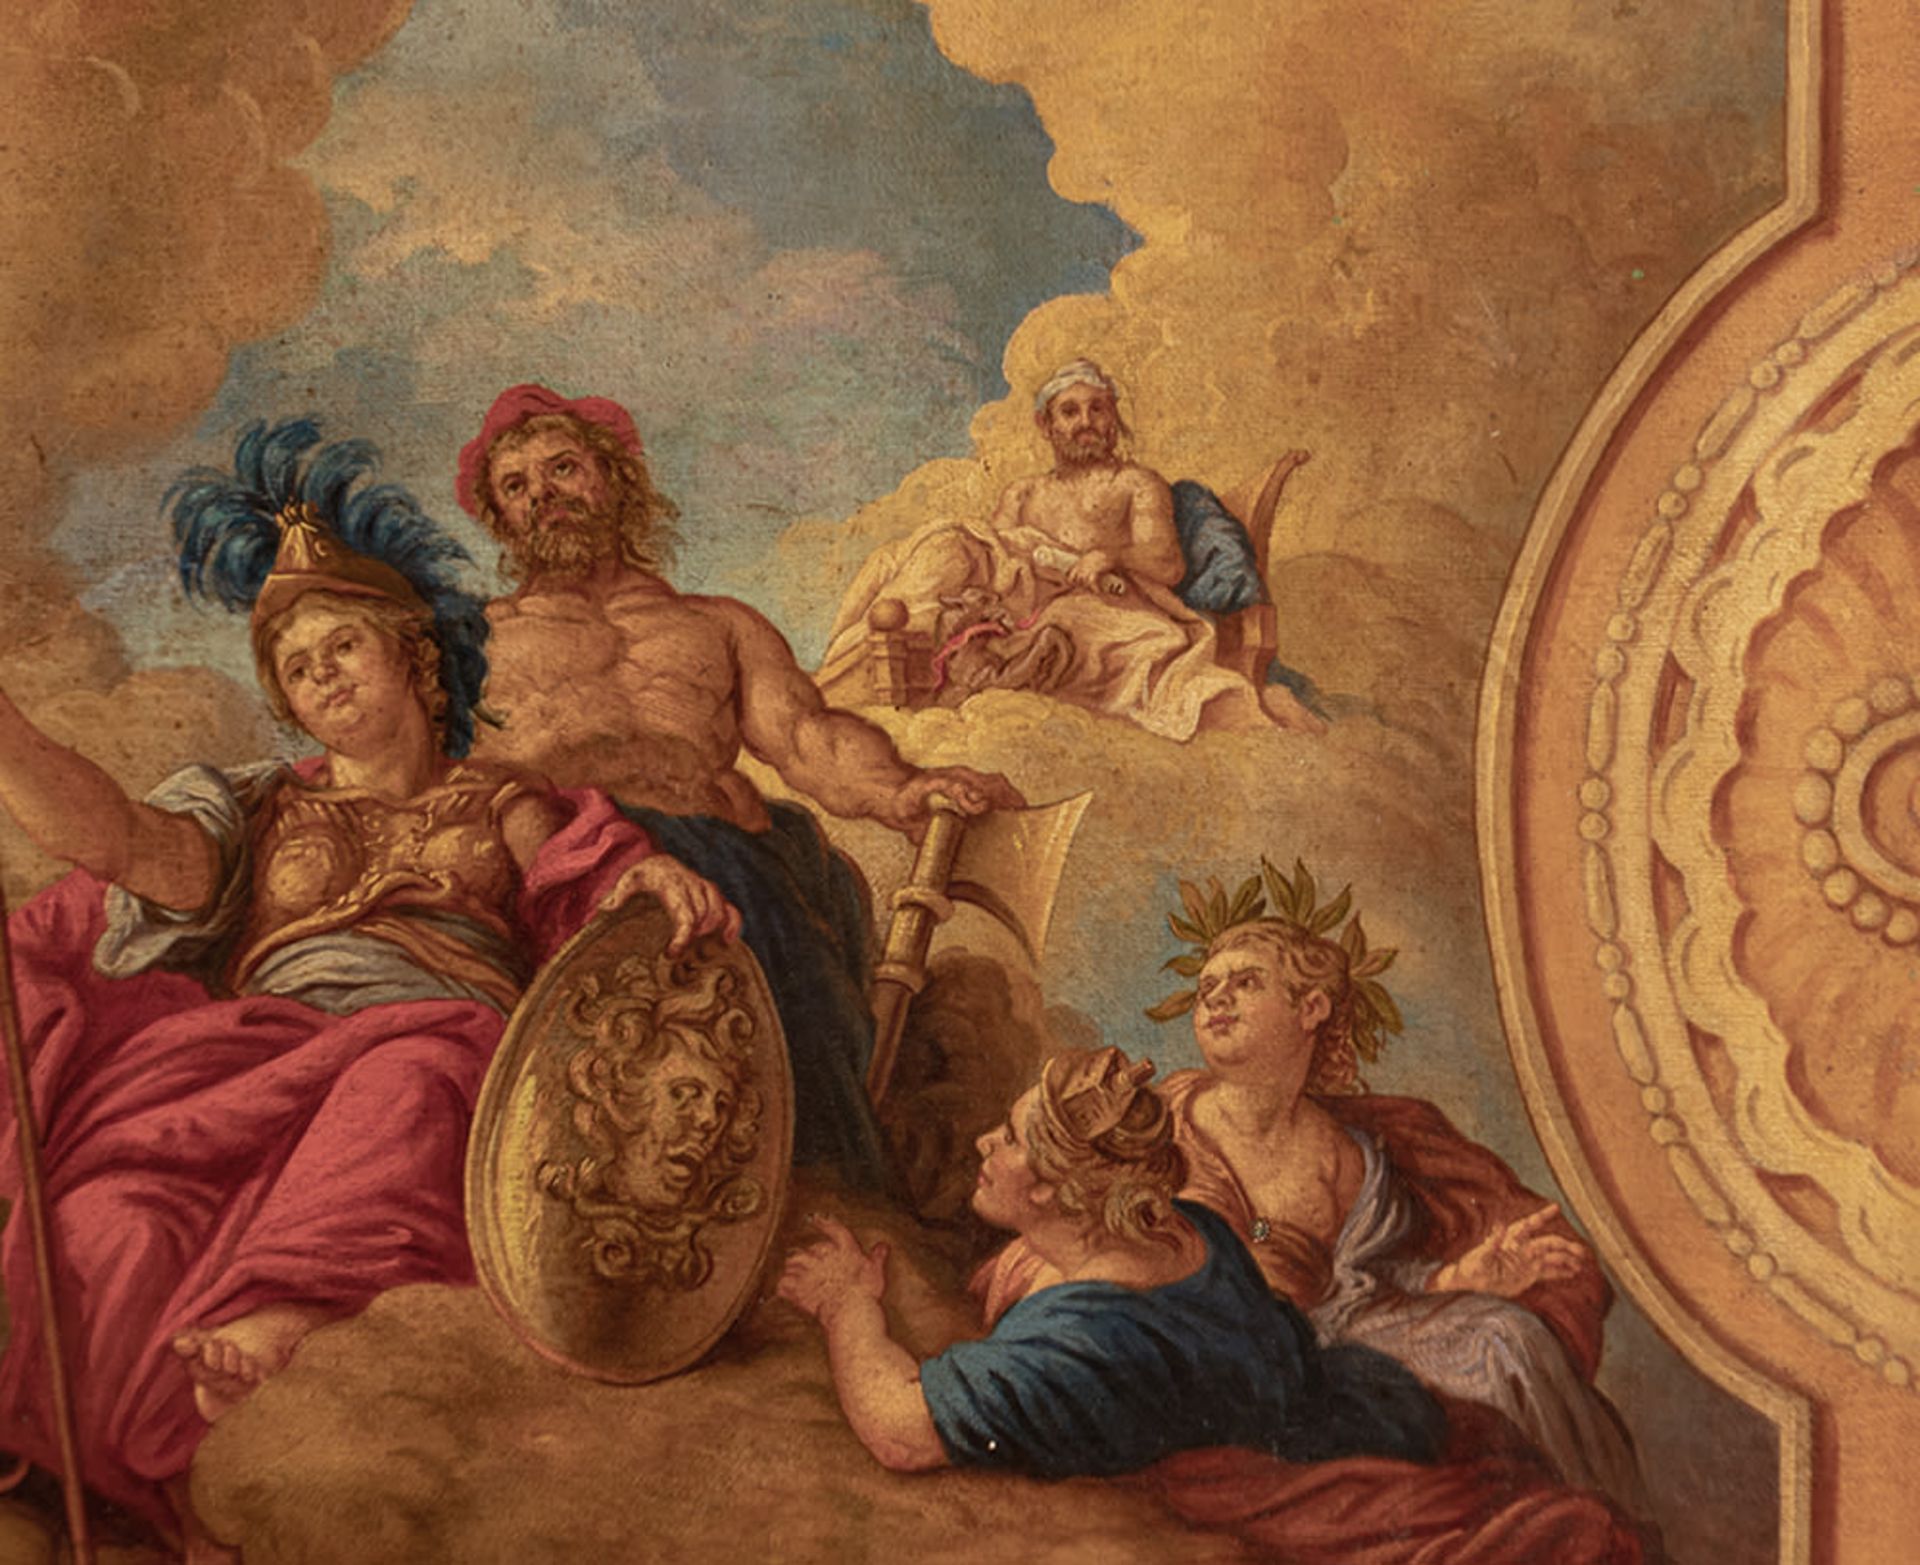 Goddess Mars, Spanish or Italian school from the late 18th C. - Image 3 of 6